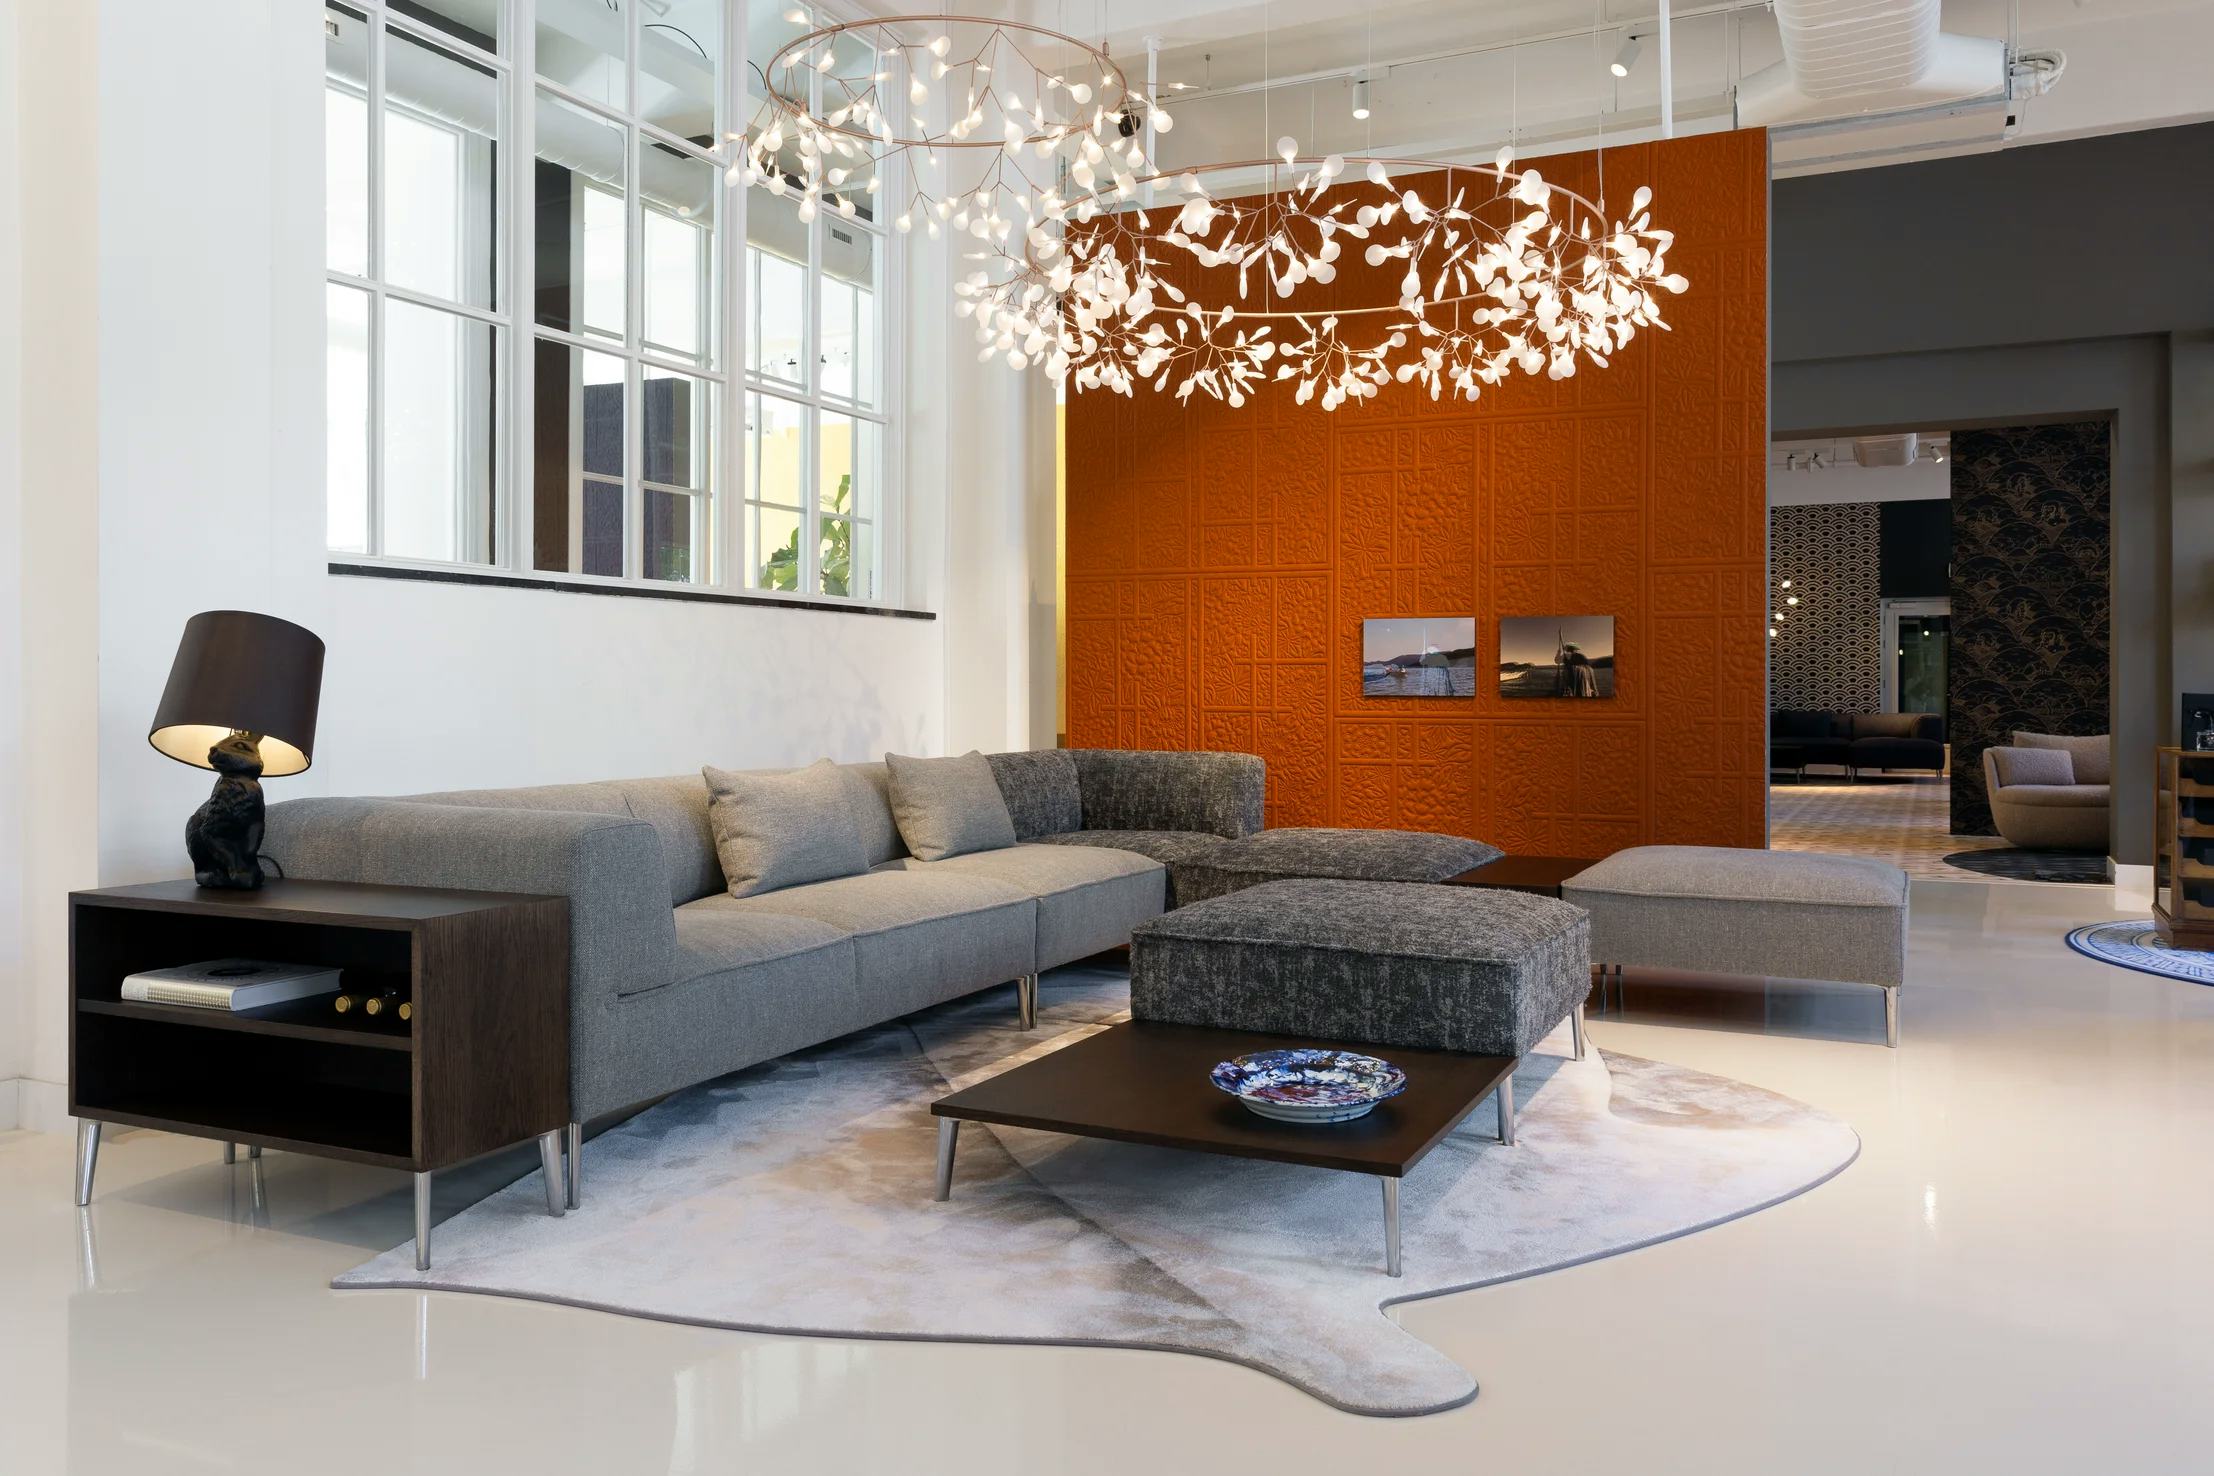 Interior of Amsterdam Showroom 2020 with Heracleum The Big O, Sofa So Good and Rabbit Lamp